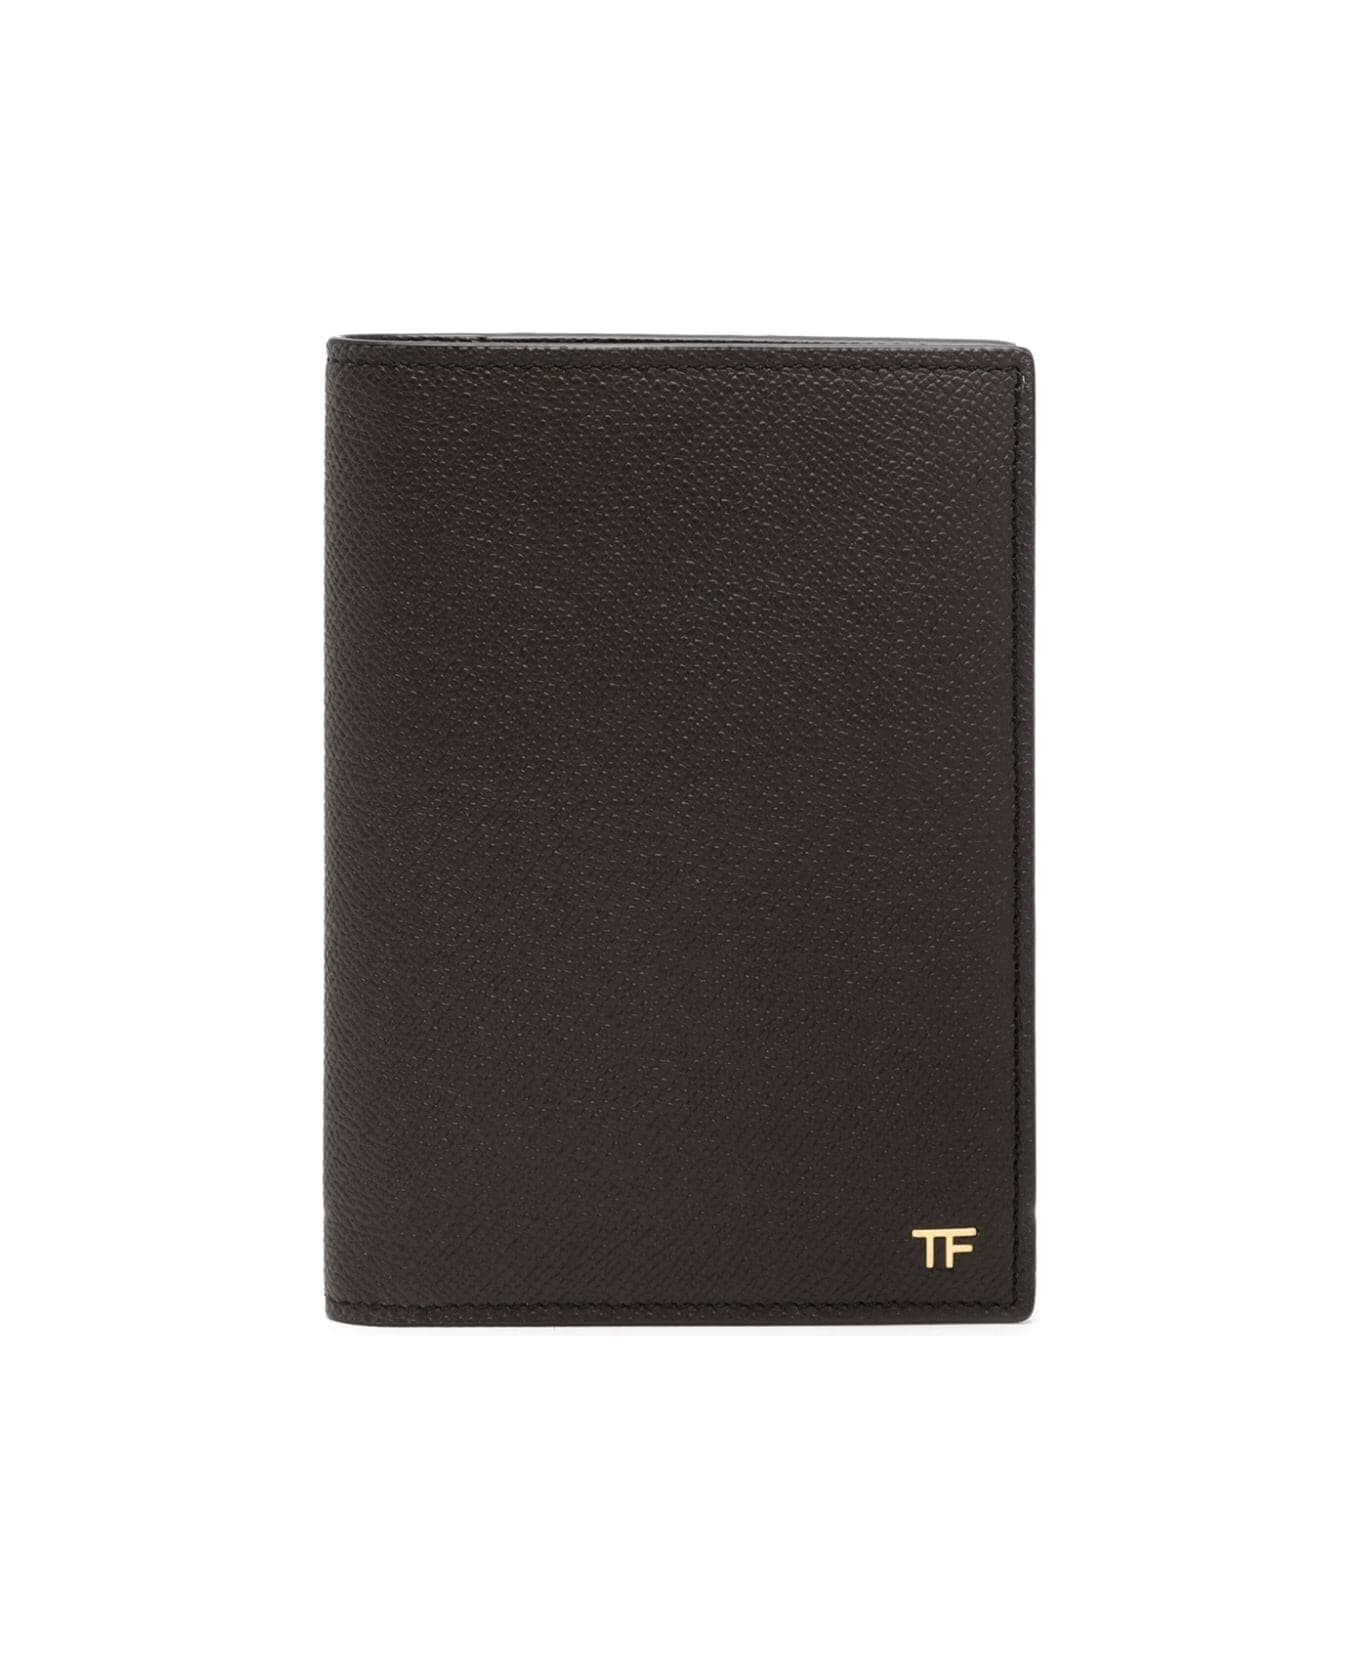 Tom Ford Stationary Wallet - Chocolate 財布